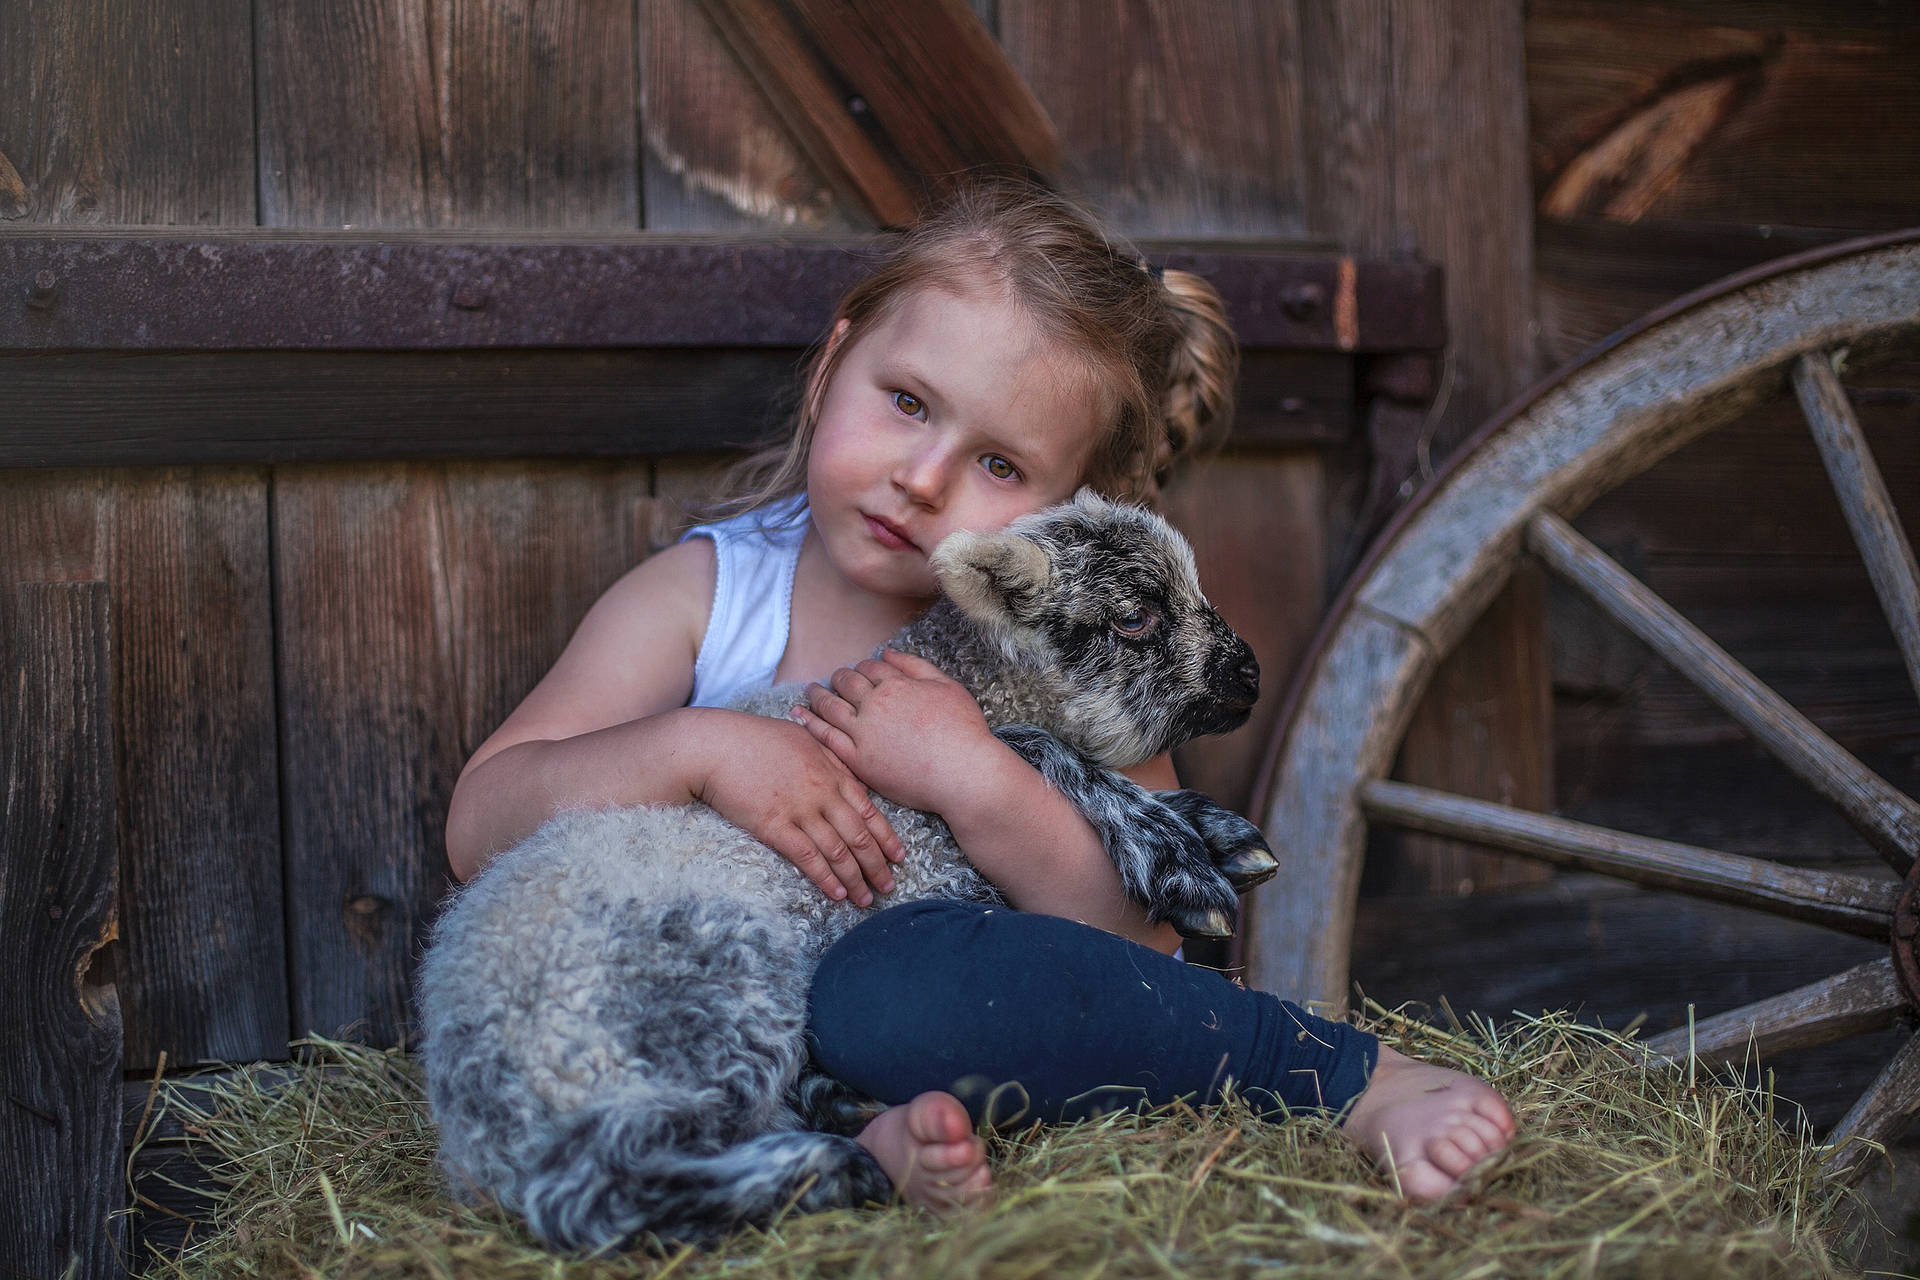 Cute Girl With Sheep In A Barn Wallpaper